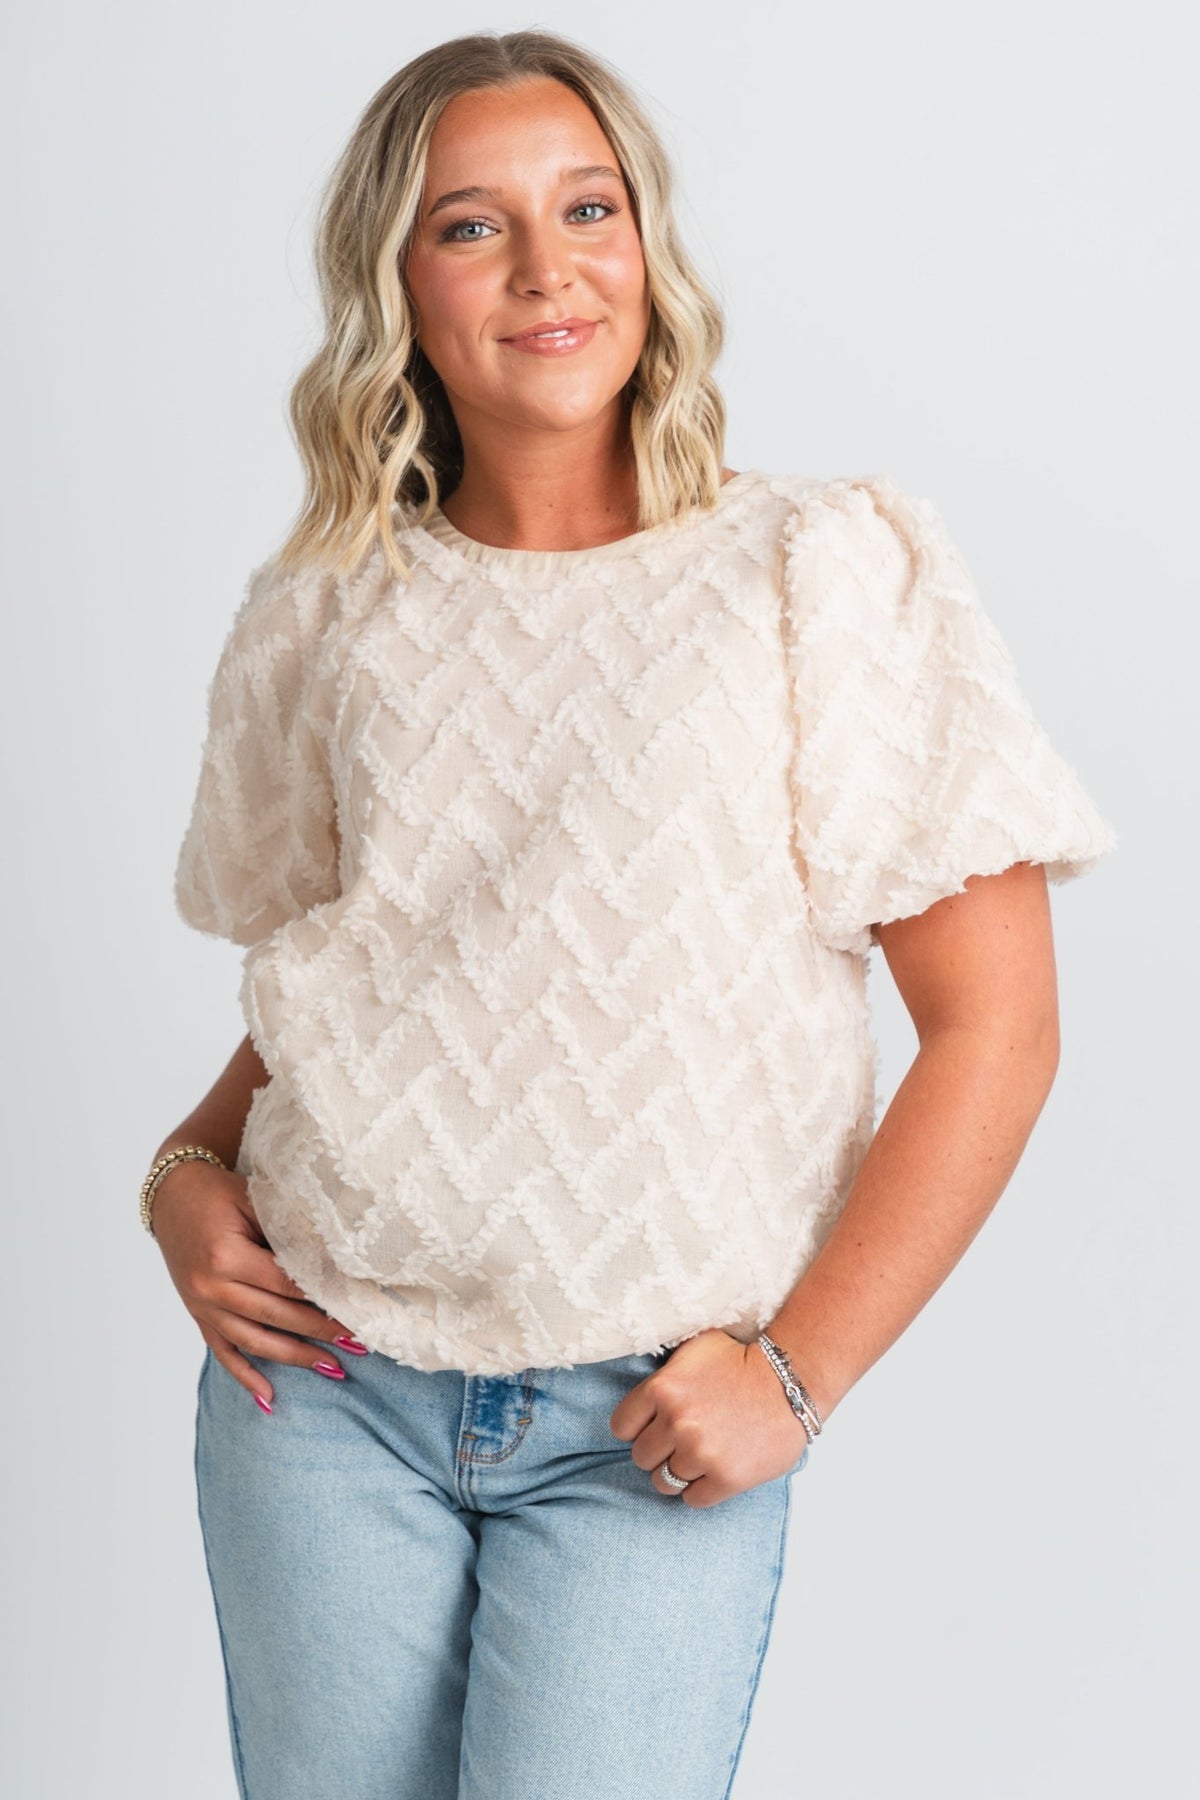 Tulle bubble sleeve top natural - Stylish Top - Cute Easter Outfits at Lush Fashion Lounge Boutique in Oklahoma